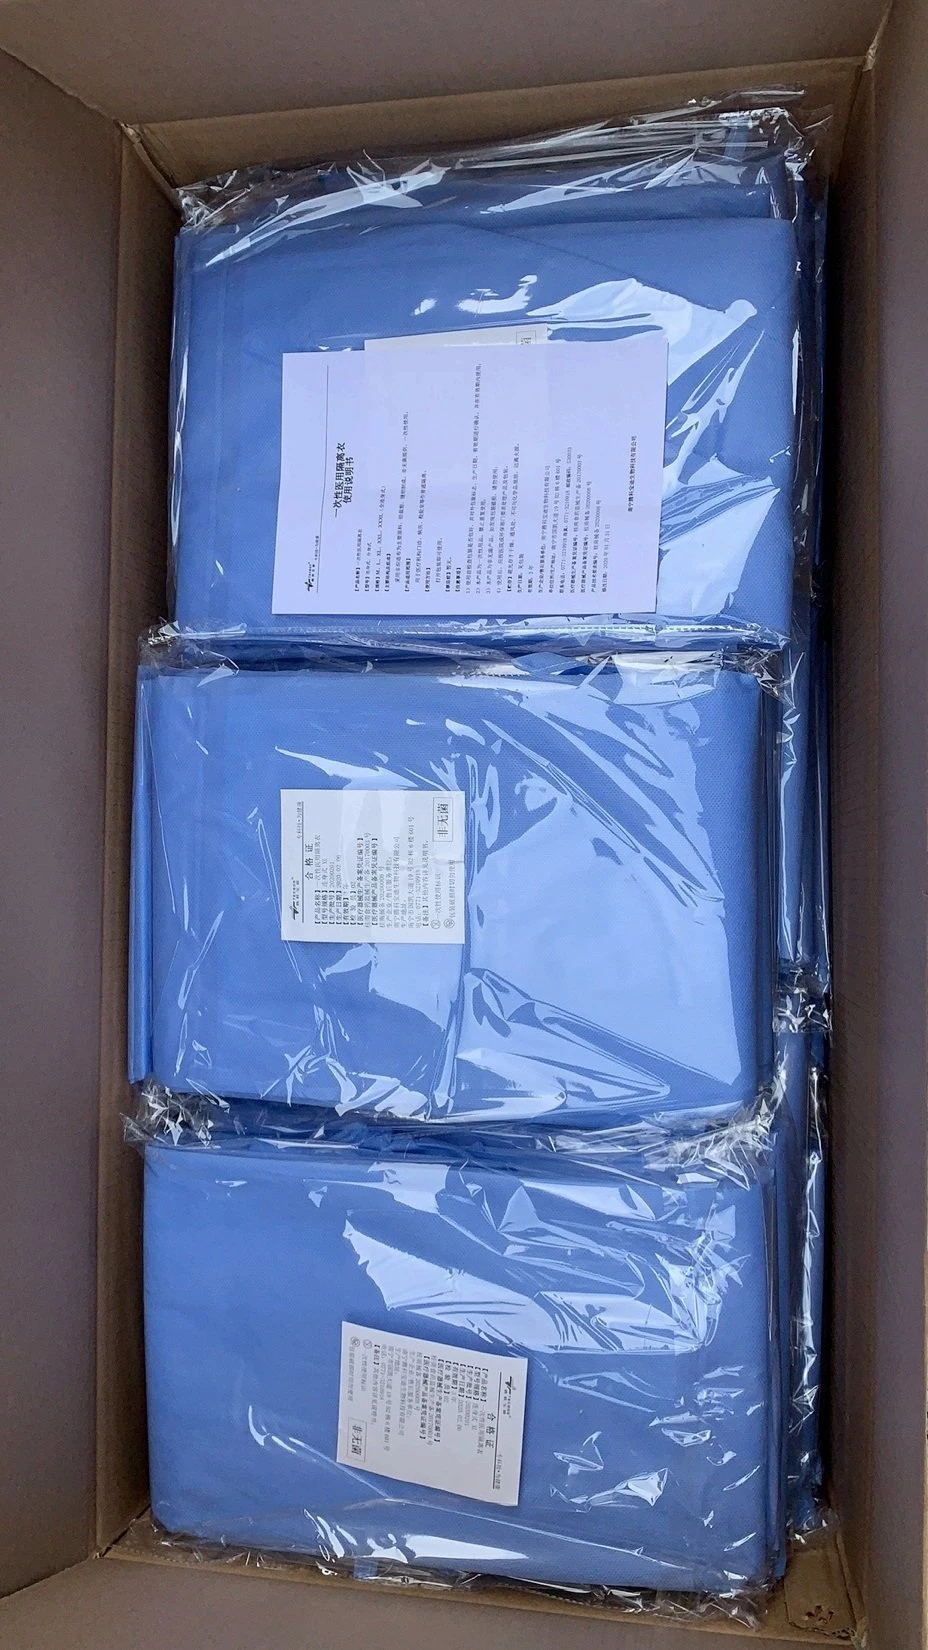 Disposalbe Isolation Gown (SS Non-woven PP+ PE coated, 45GSM) (NON MEDICAL)